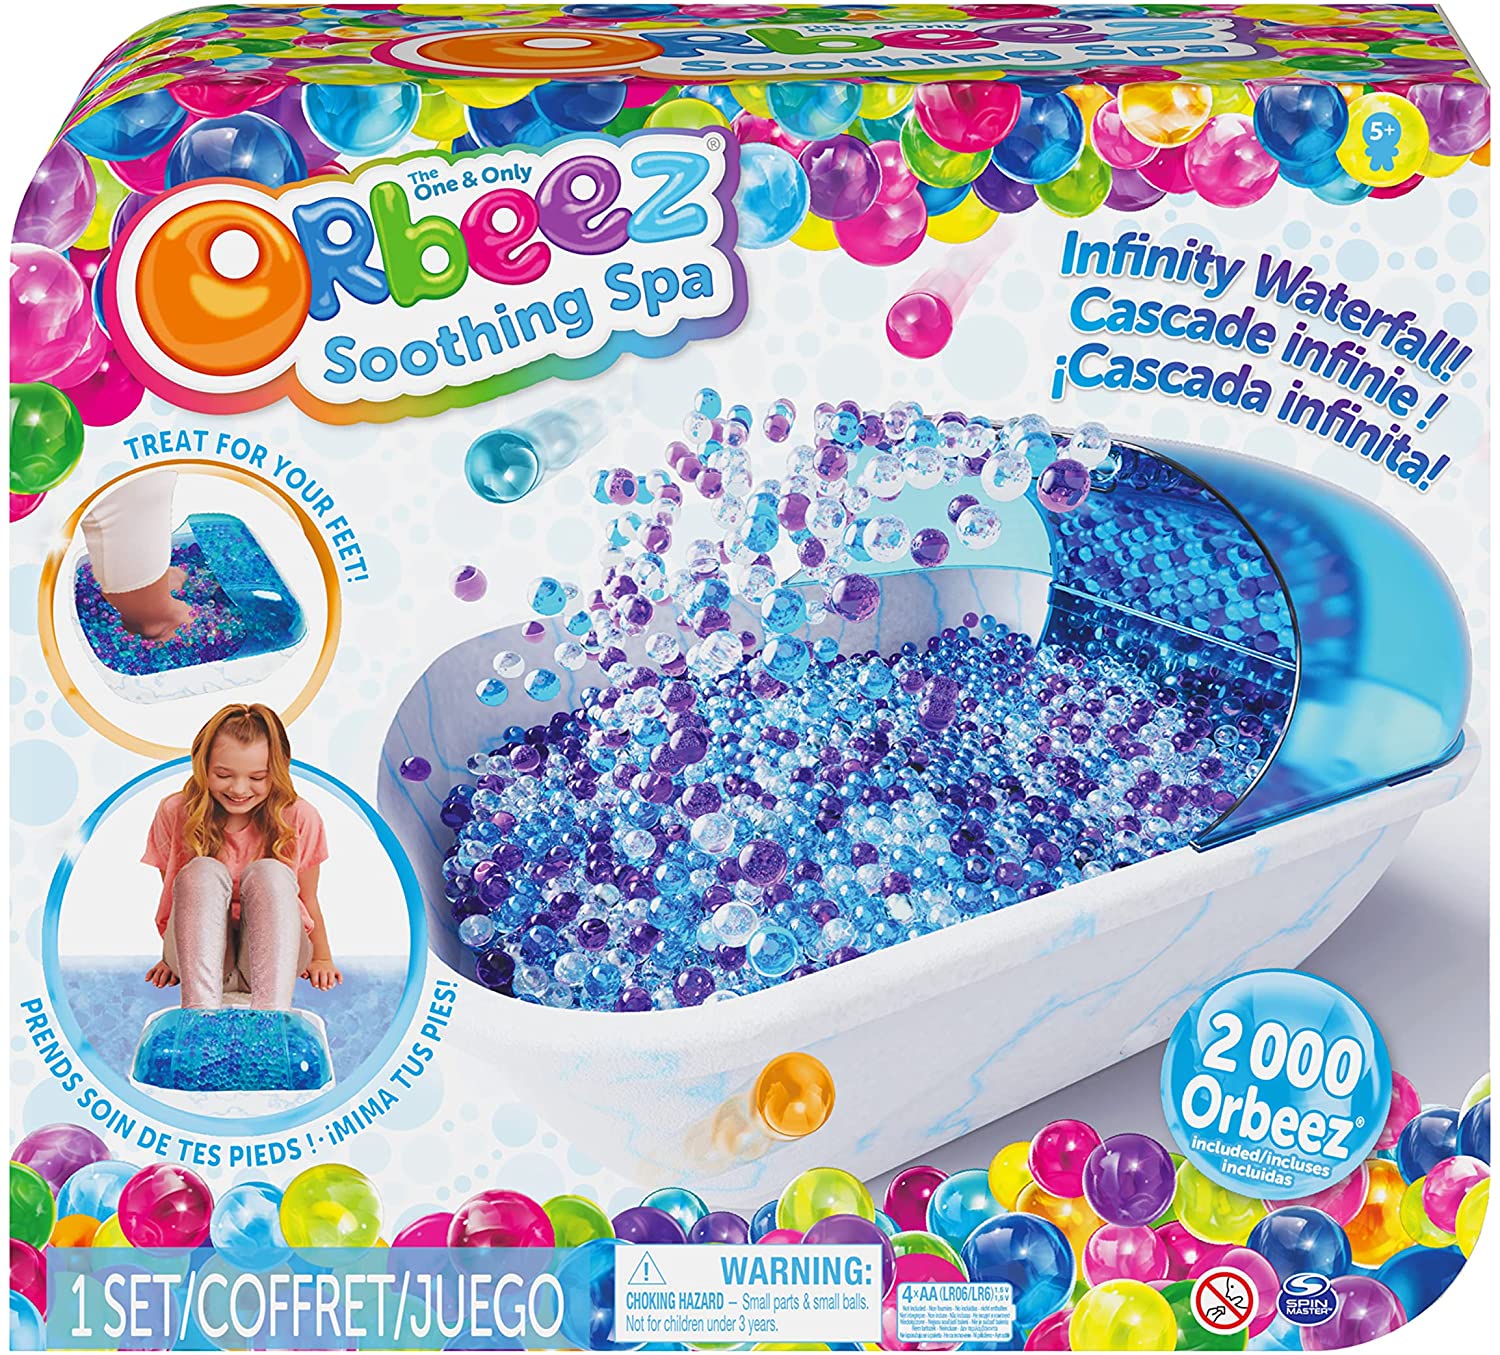 Orbeez Soothing Foot Spa With 2 000